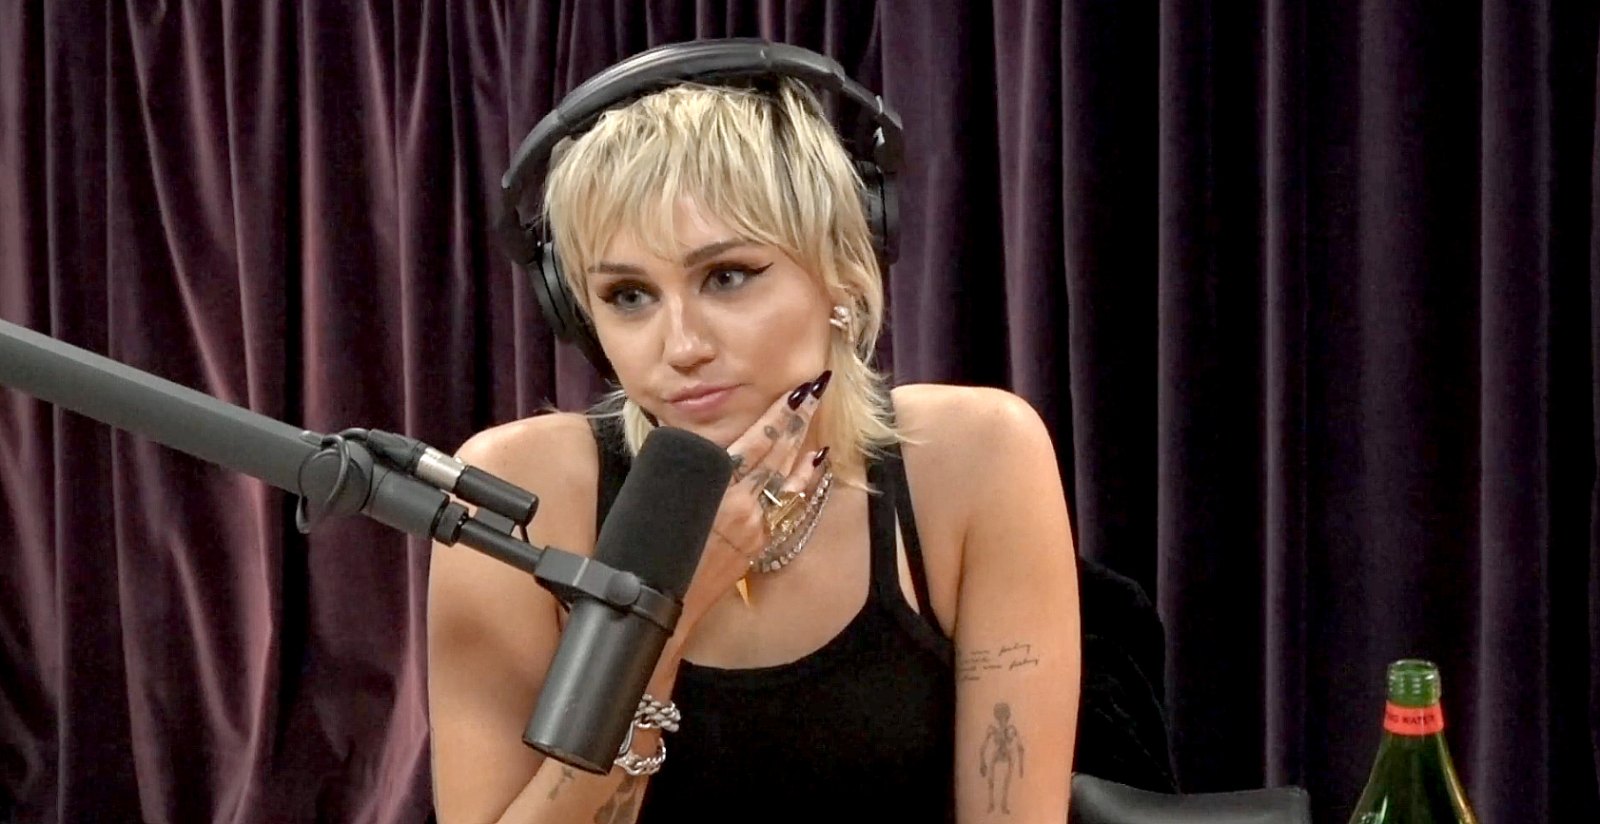 Miley Cyrus Details Divorce, Sobriety and More in New Interview